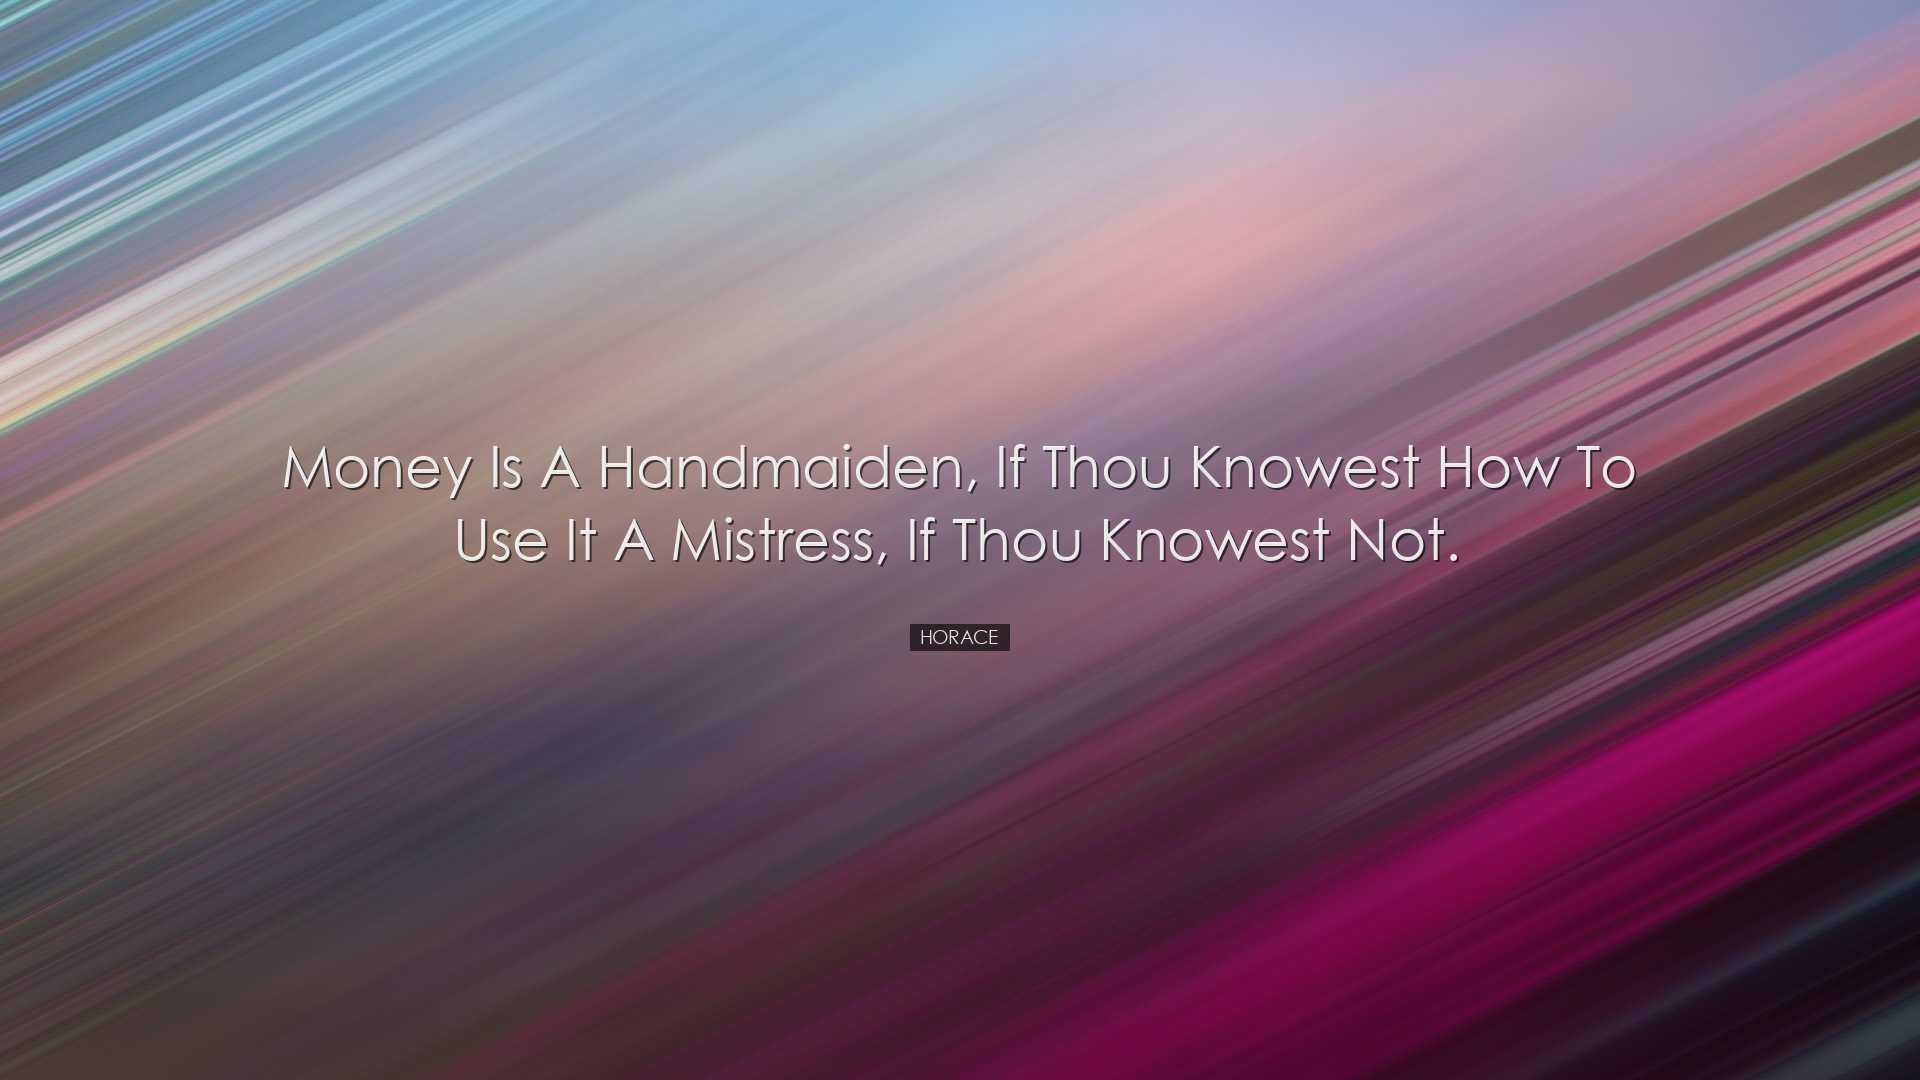 Money is a handmaiden, if thou knowest how to use it a mistress, i